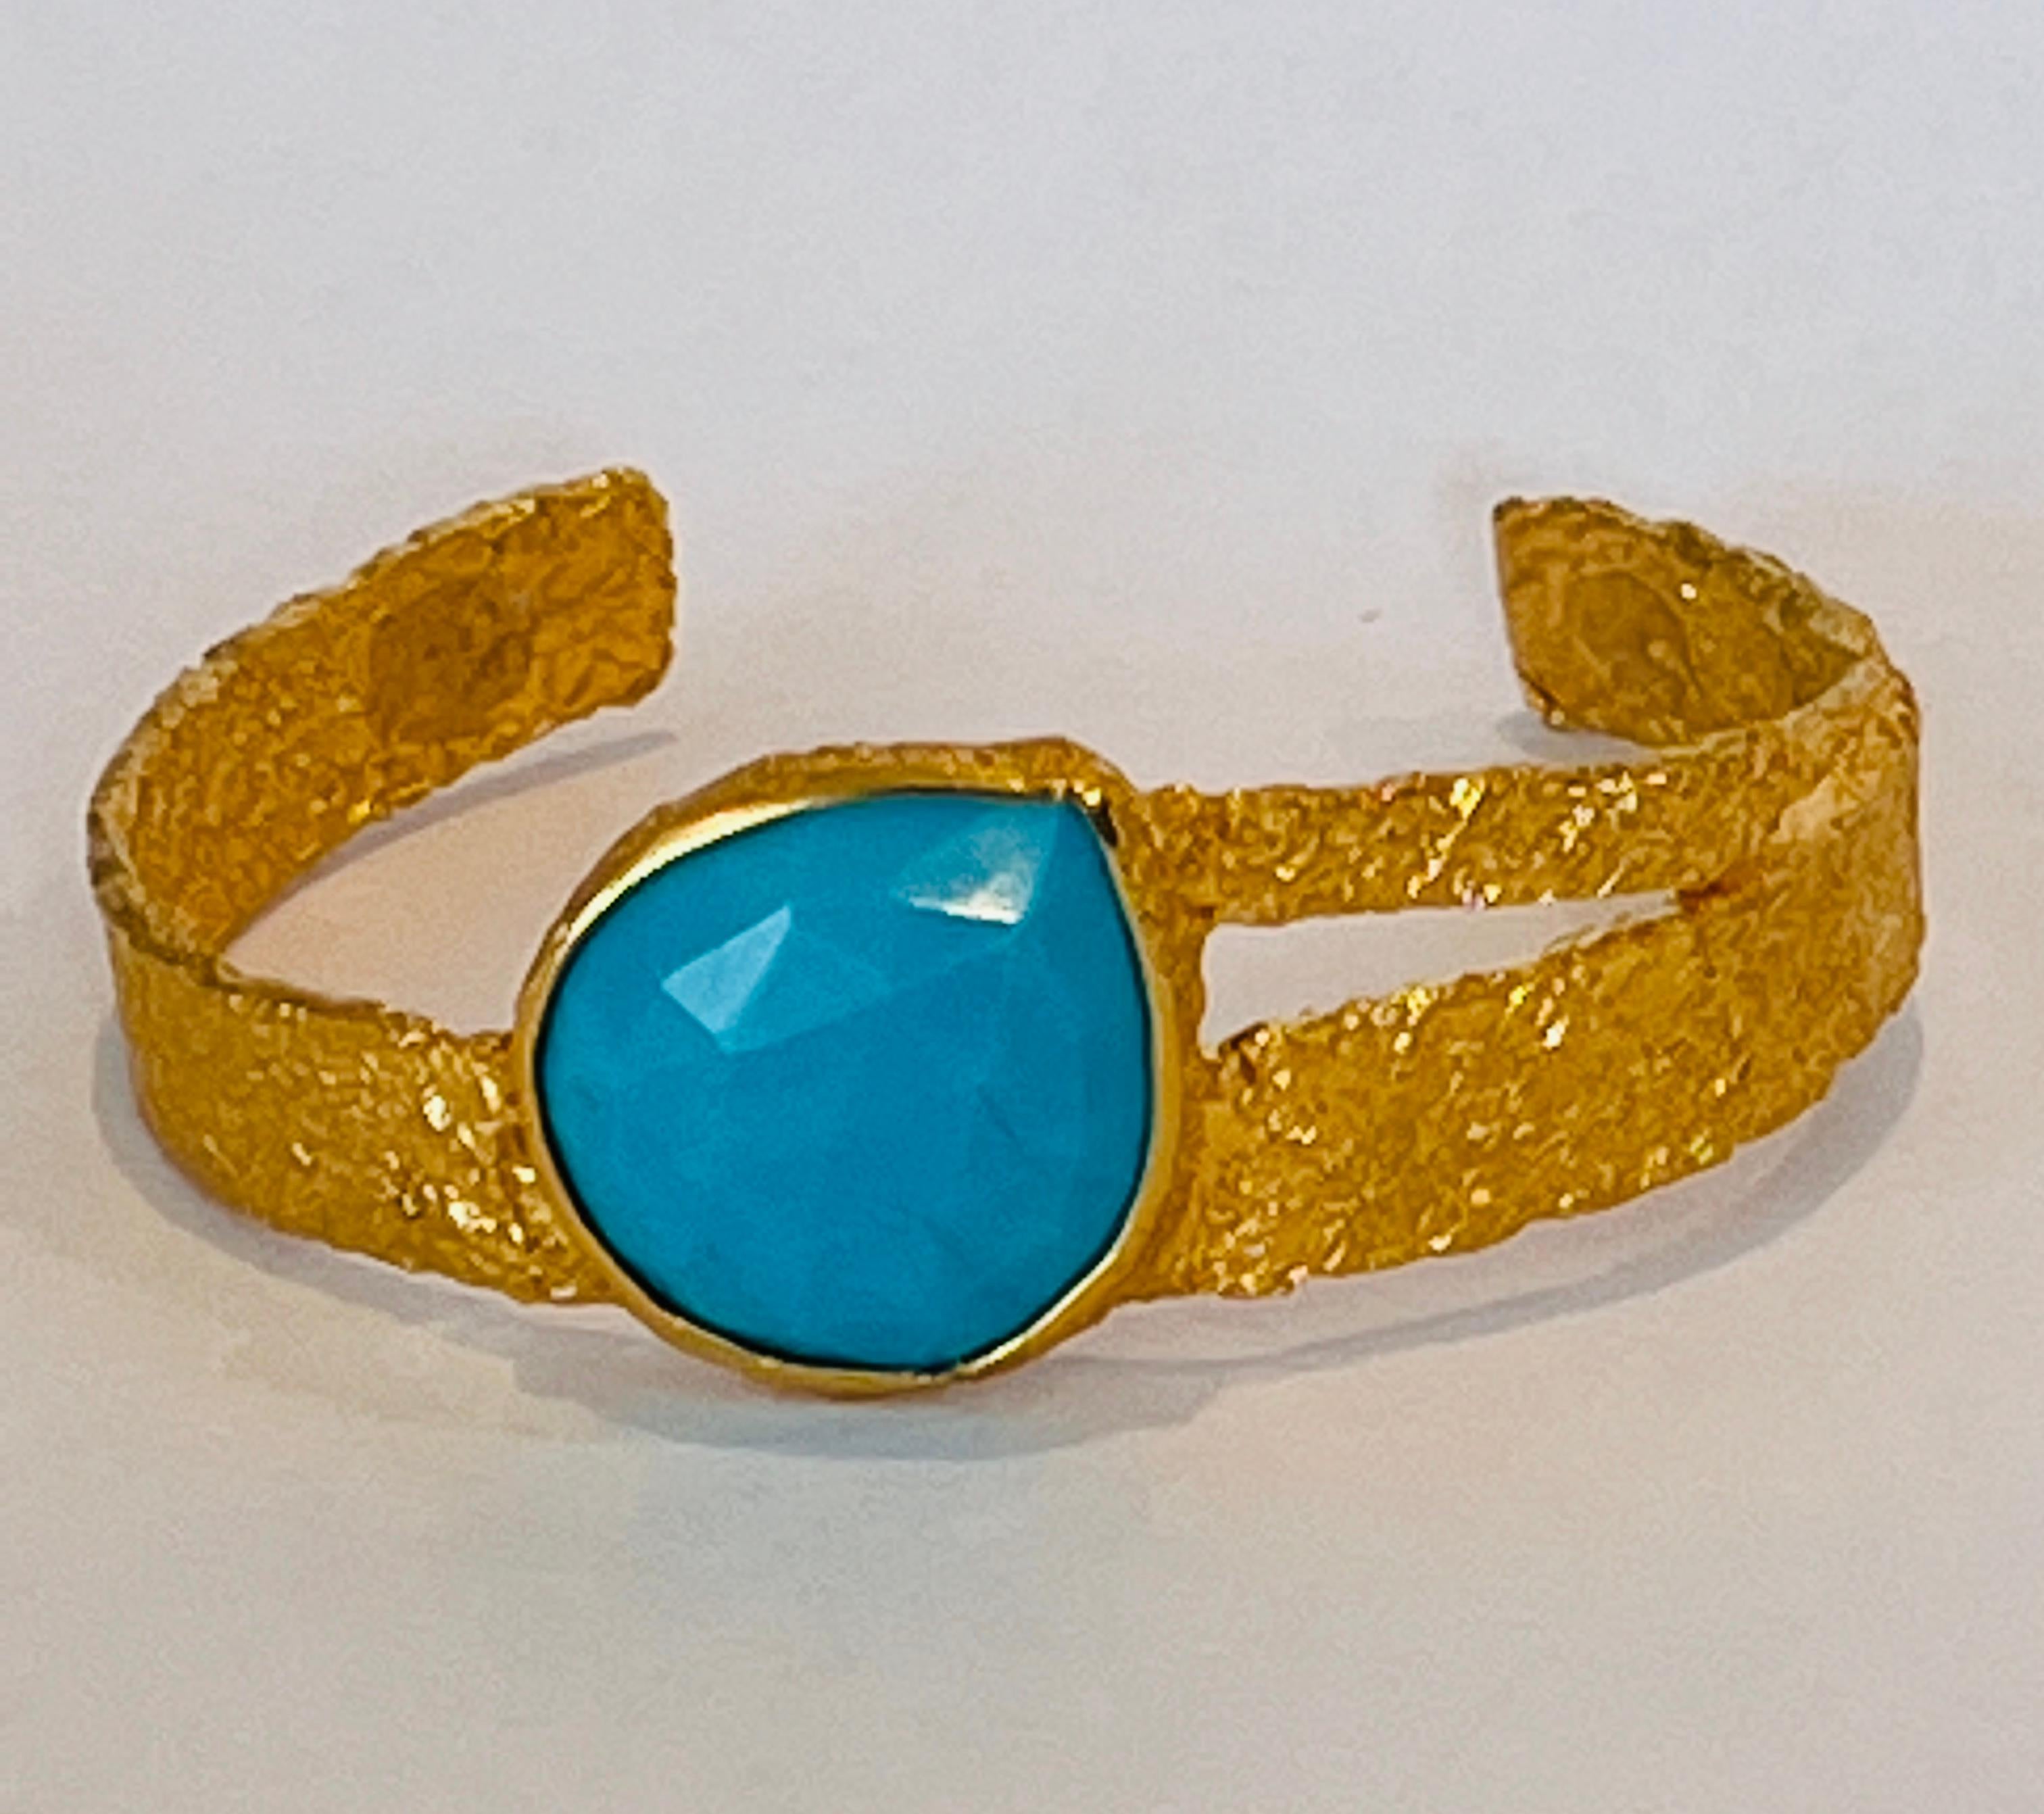 Artisan 22k Gold Handmade Cuff with Turquoise, by Tagili For Sale